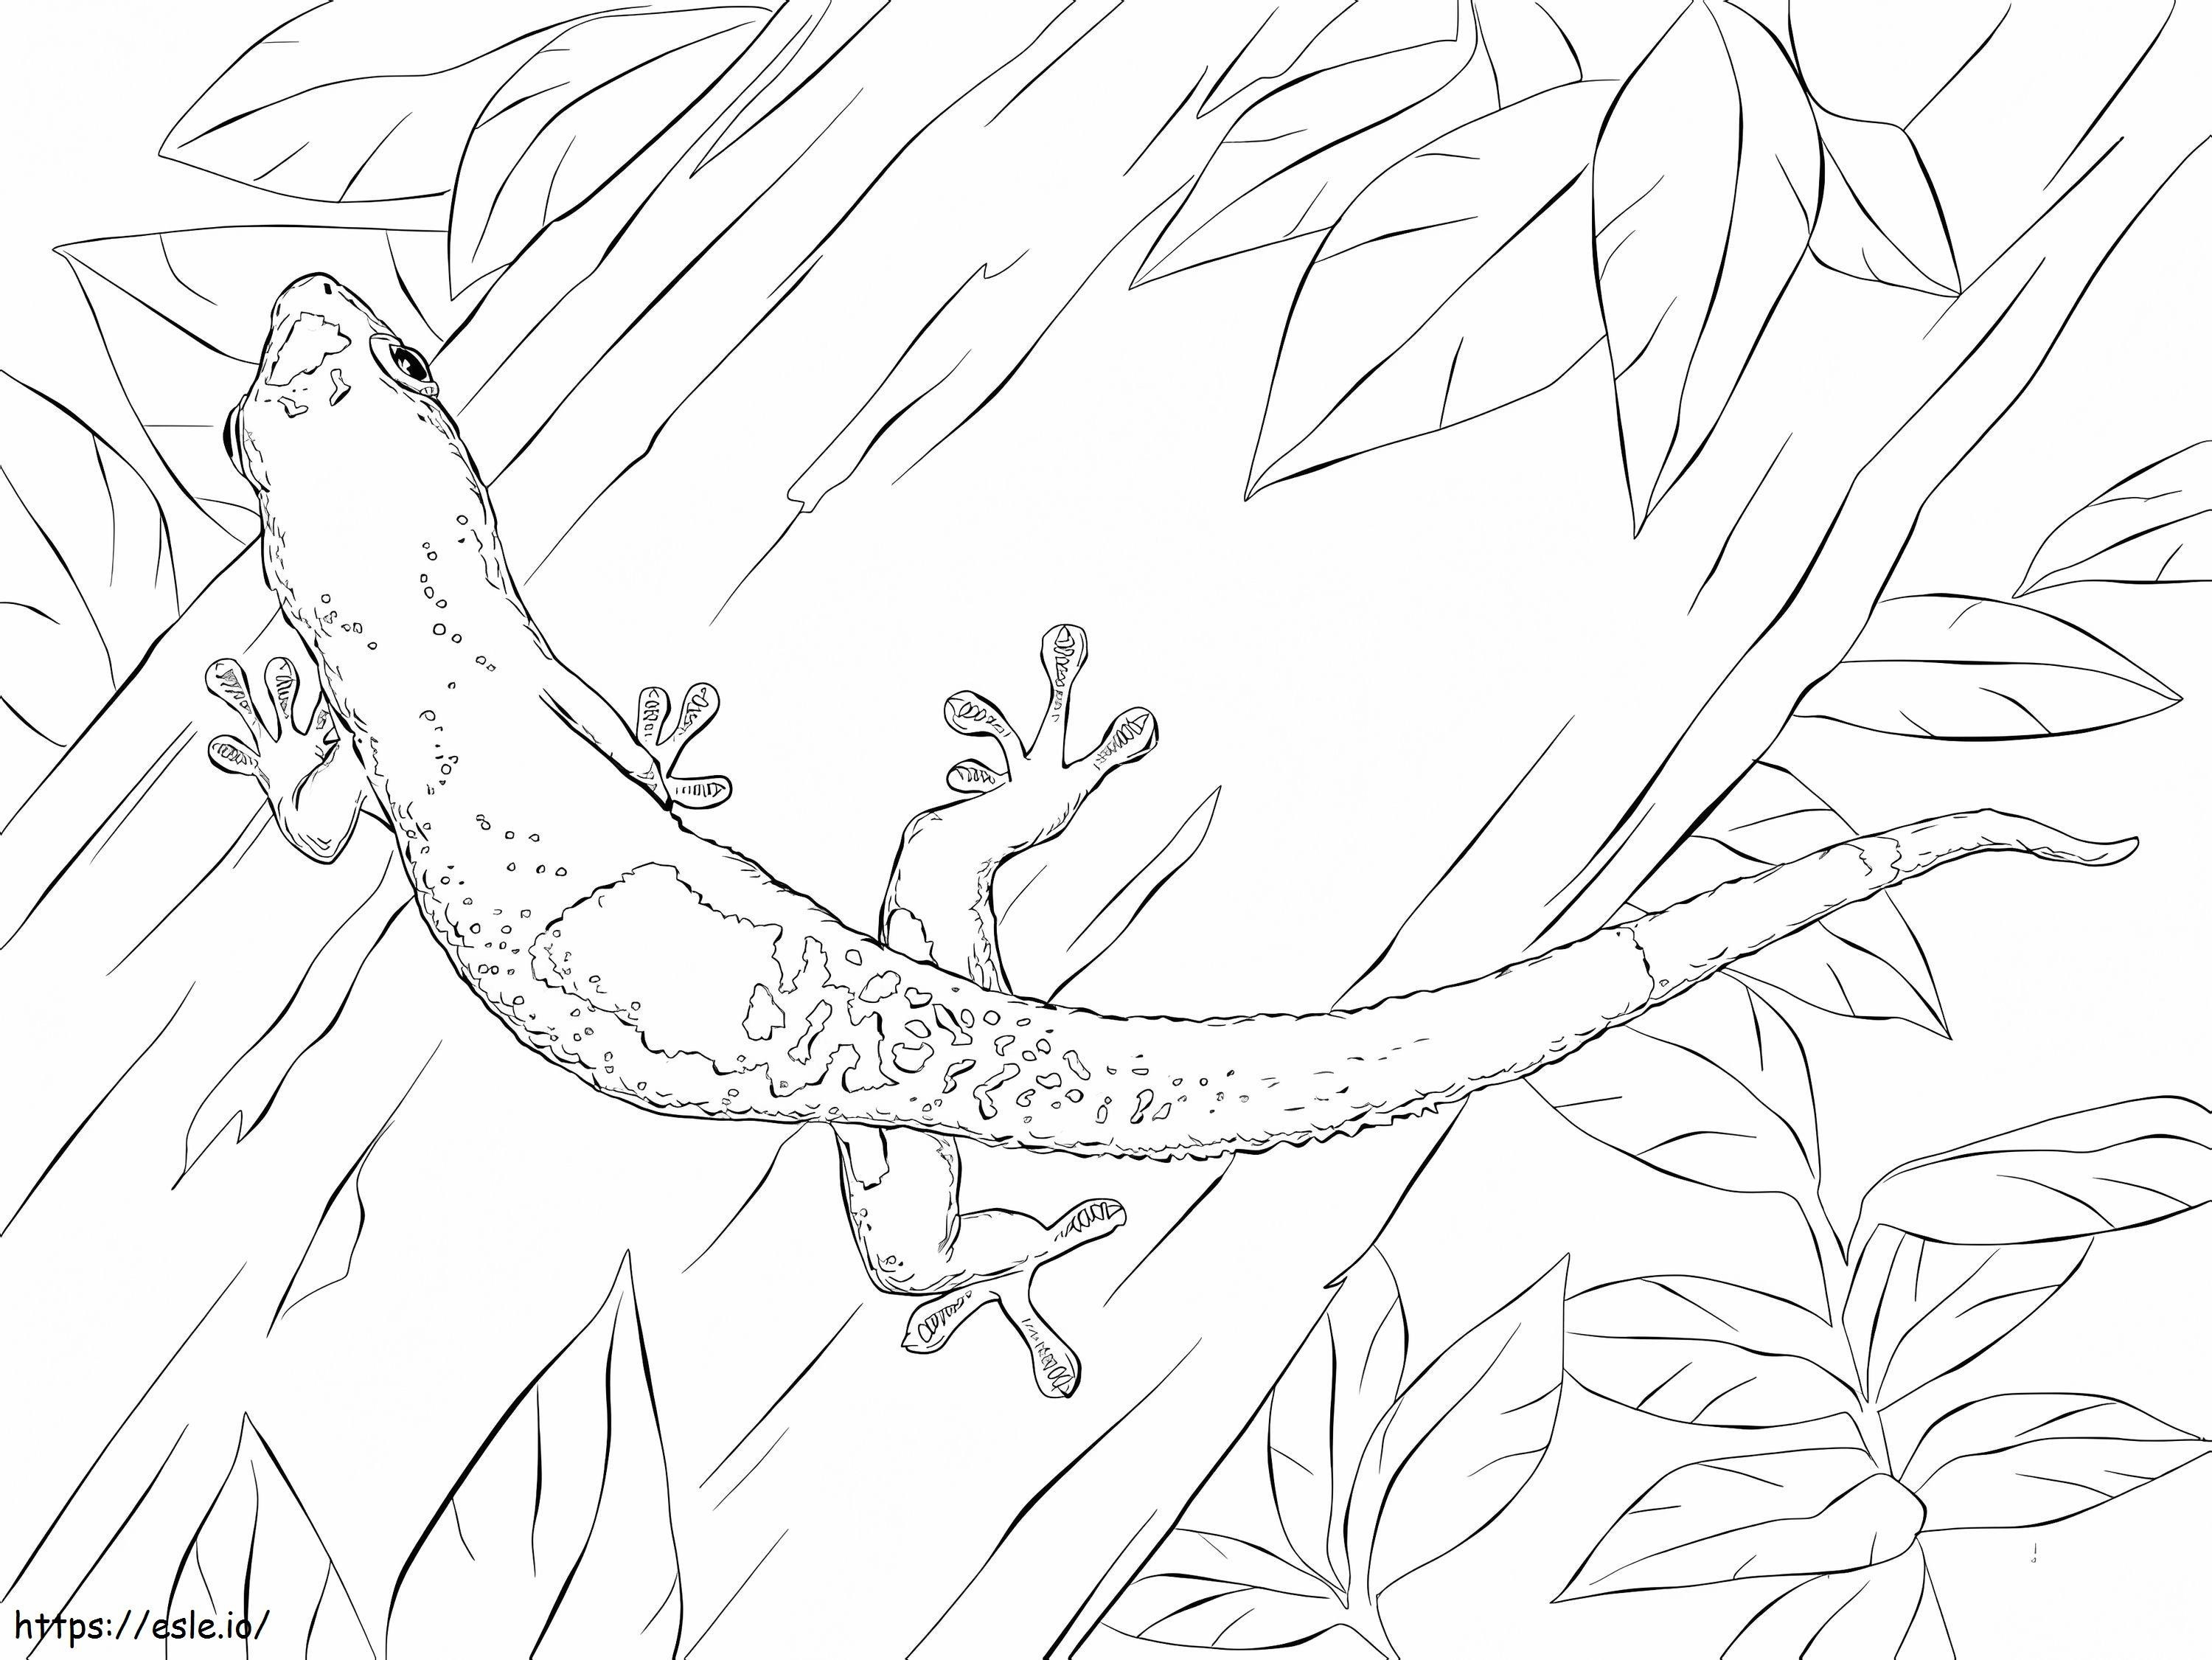 Madagascar Day Gecko coloring page